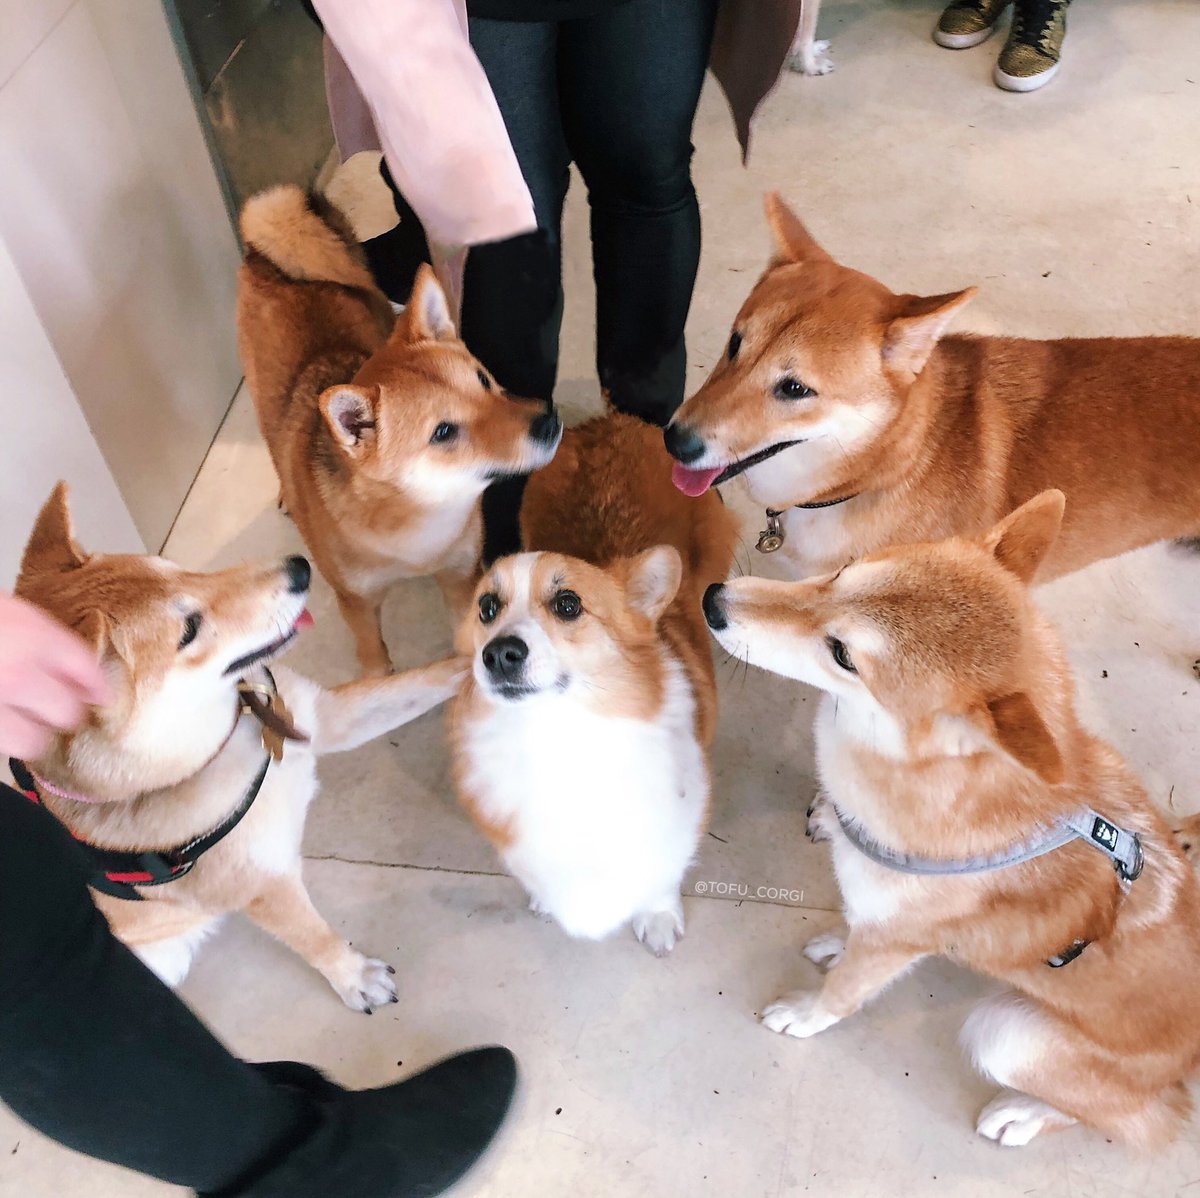 This is Tofu, she protec, she attac, she the only Corgo in the shiba ᵖᵃᶜᶜ